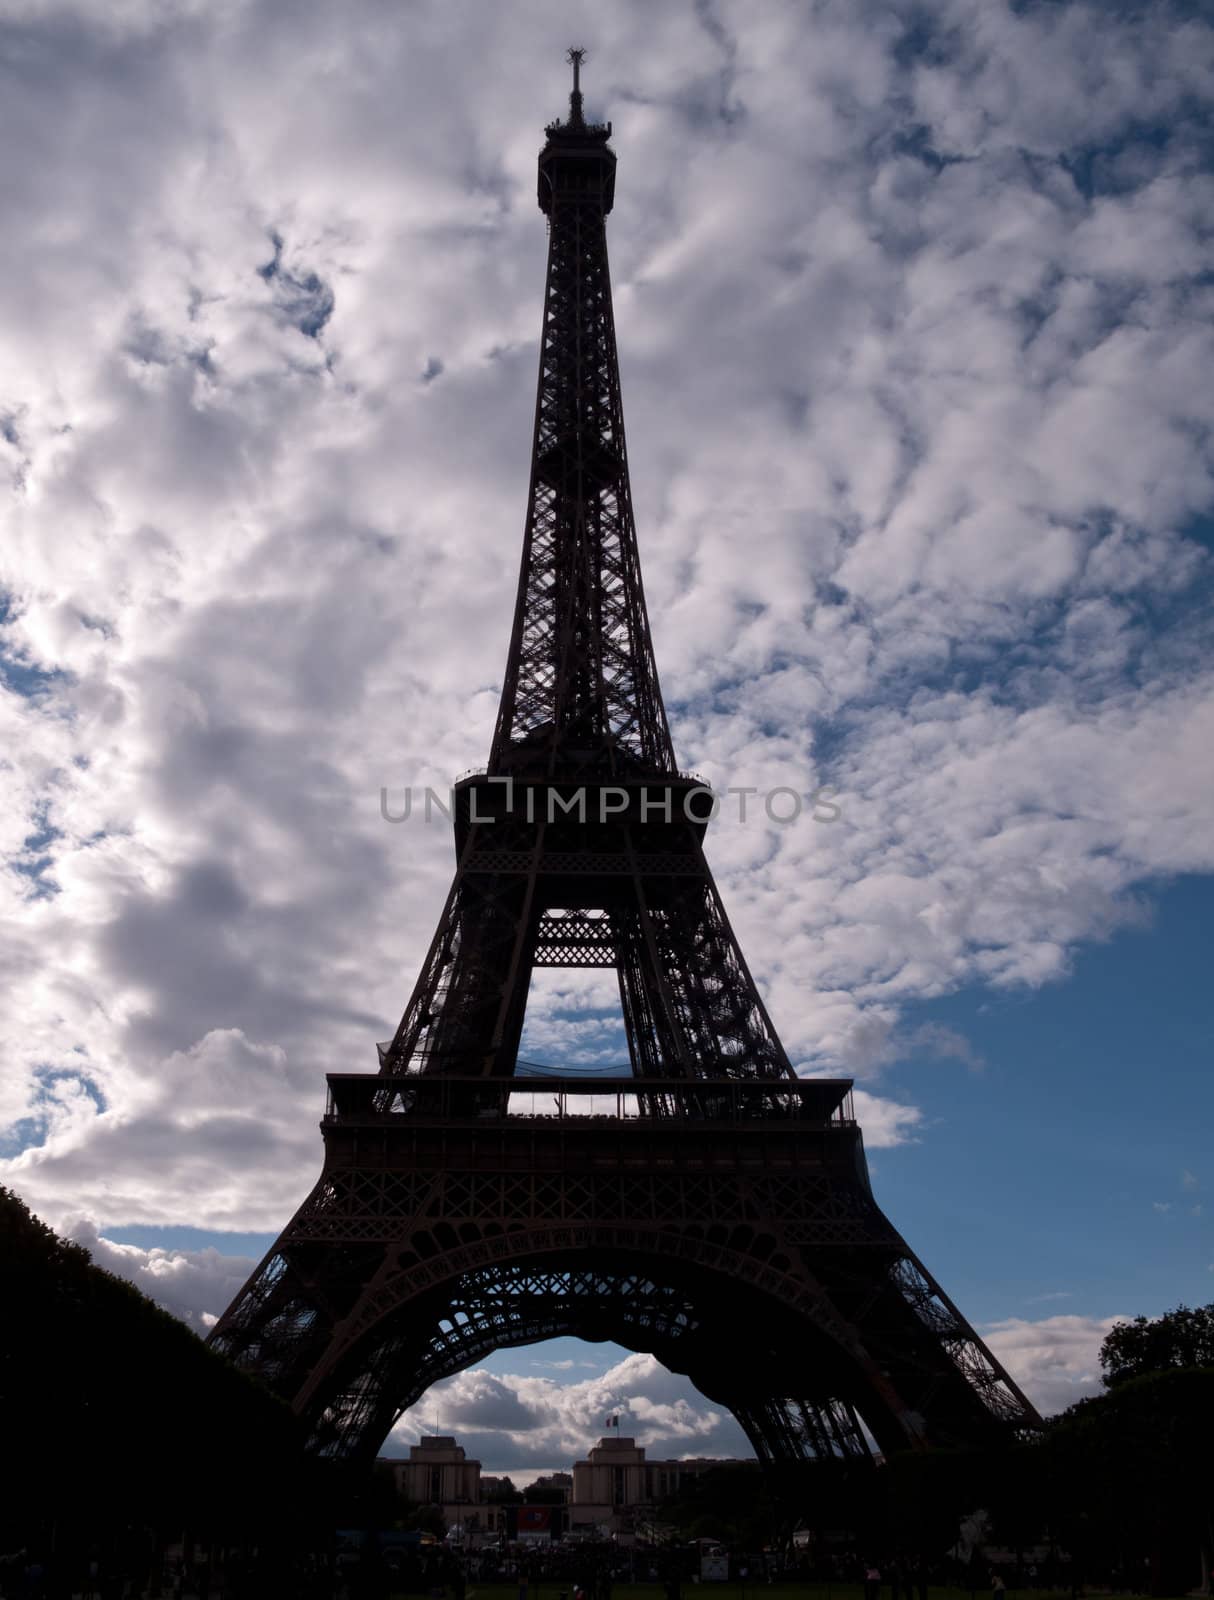 Silhouette of Eiffel Tower by steheap